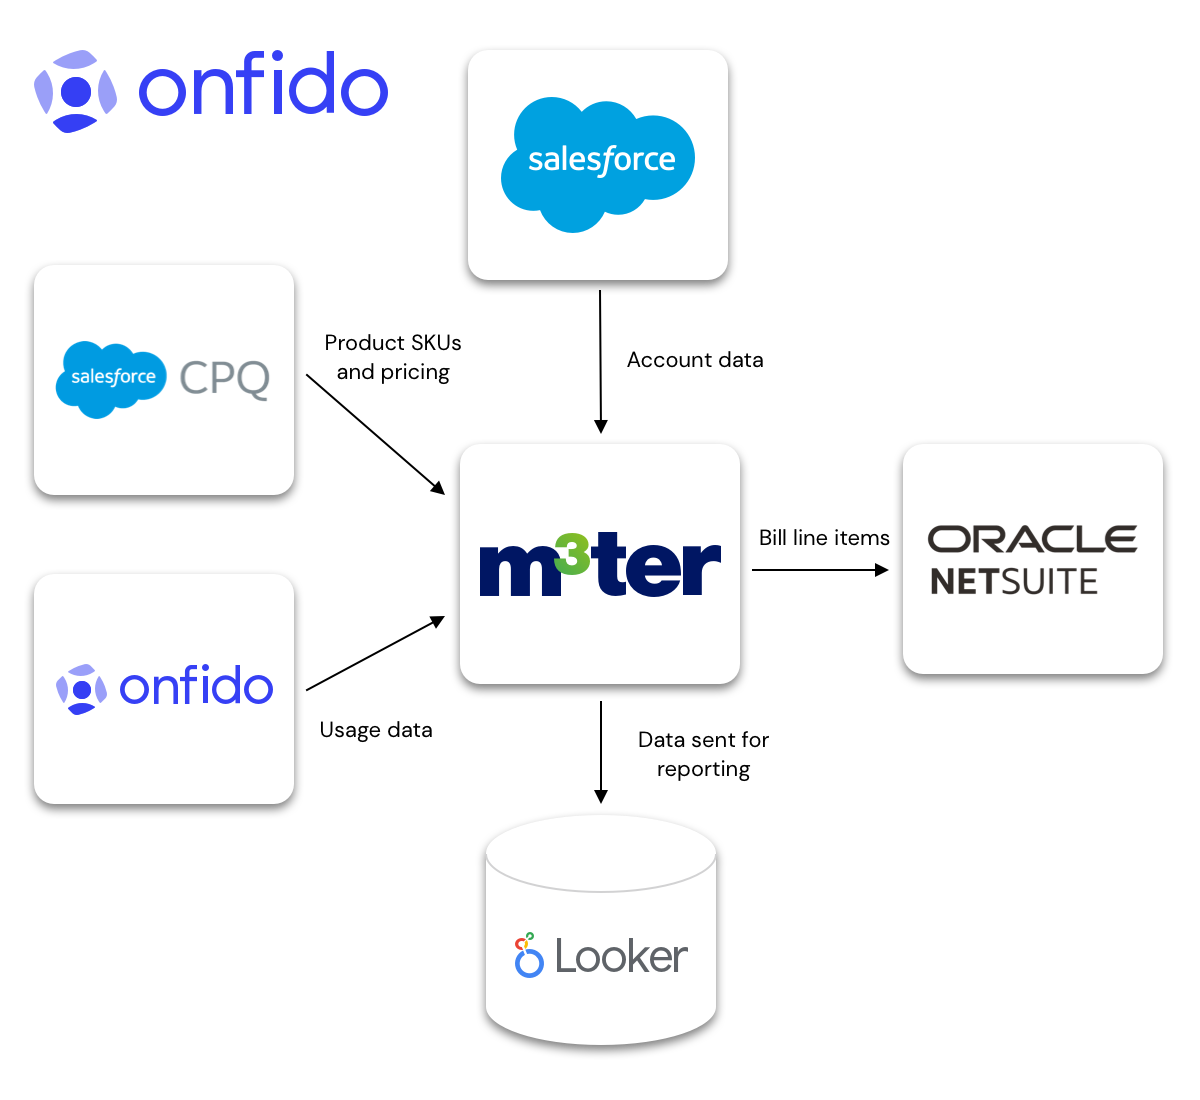 Diagram showing how m3ter integrates with Onfido's usage data and existing systems - Salesforce, Looker and Netsuite